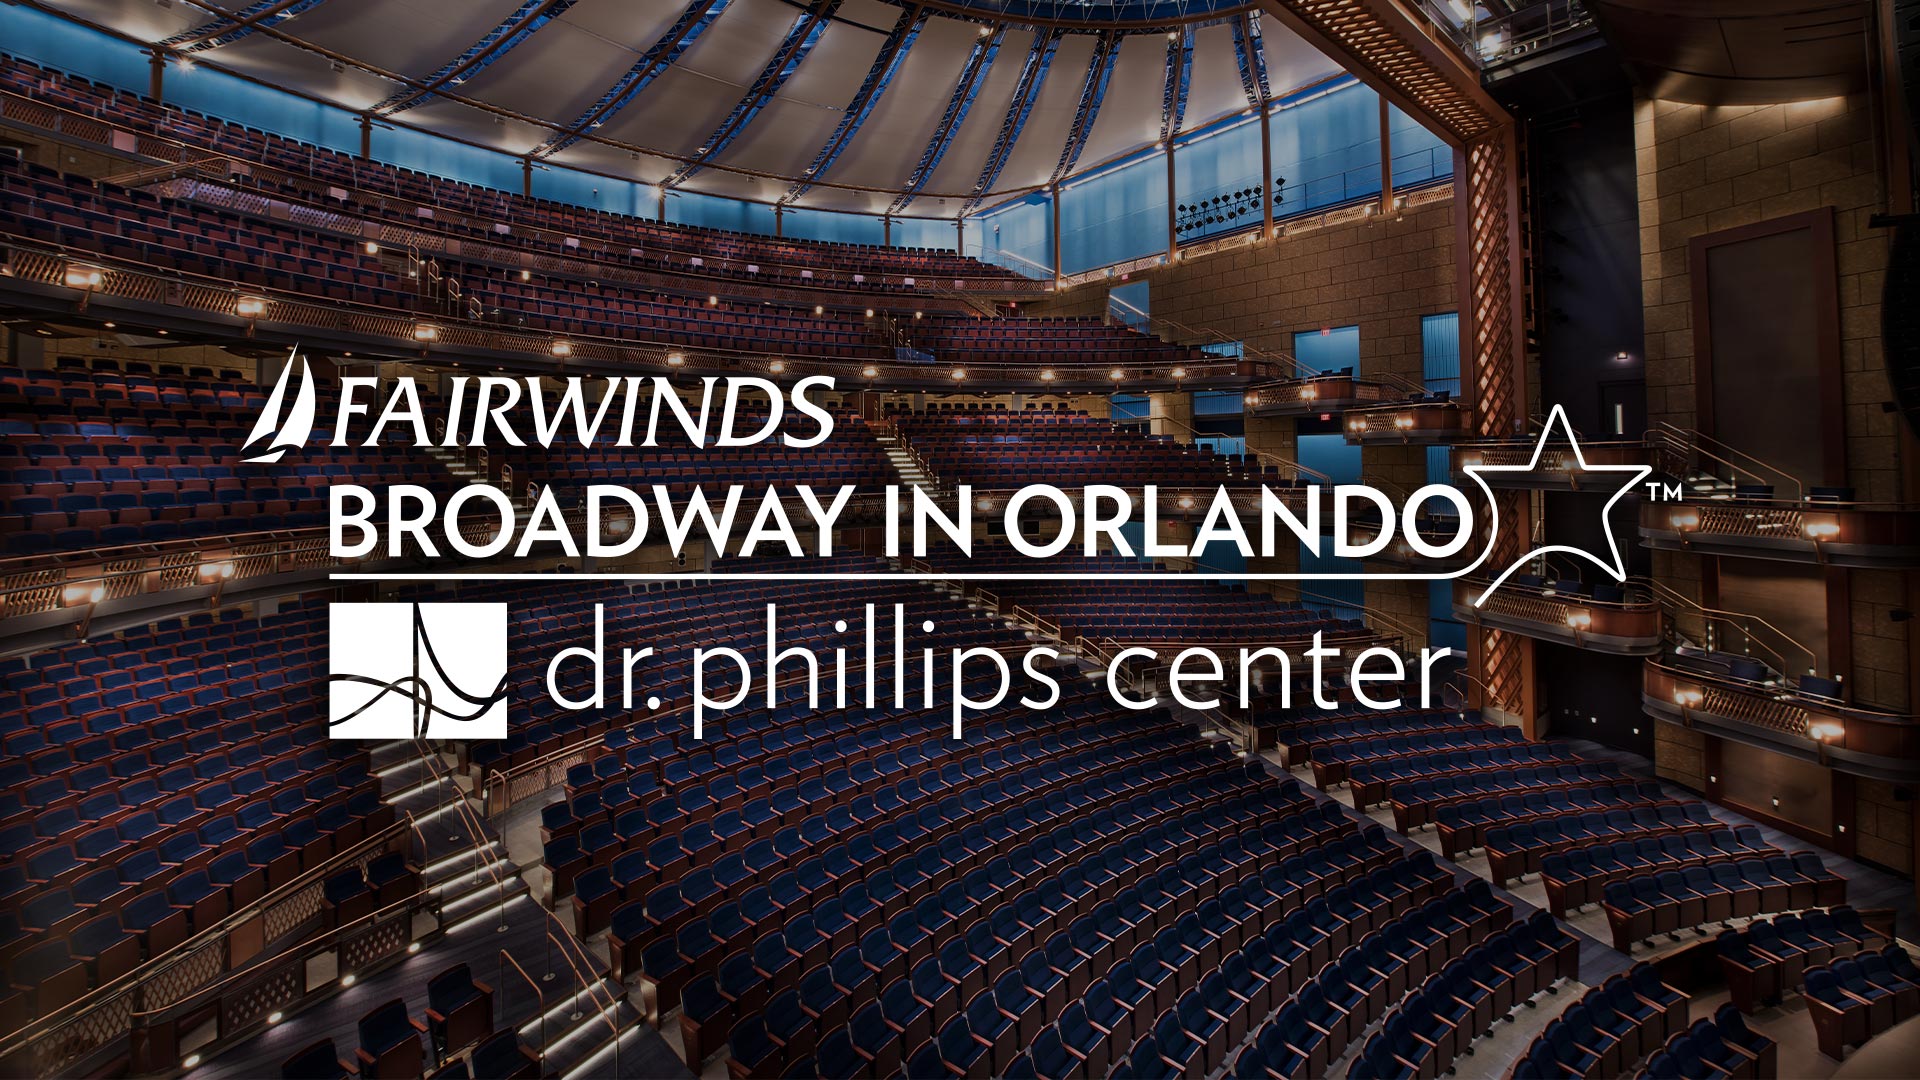 Fairwinds Broadway in Orlando at Dr. Phillips Center logo overlaid on a photo of the Walt Disney Theatre at Dr. Phillips Center for the Performing Arts